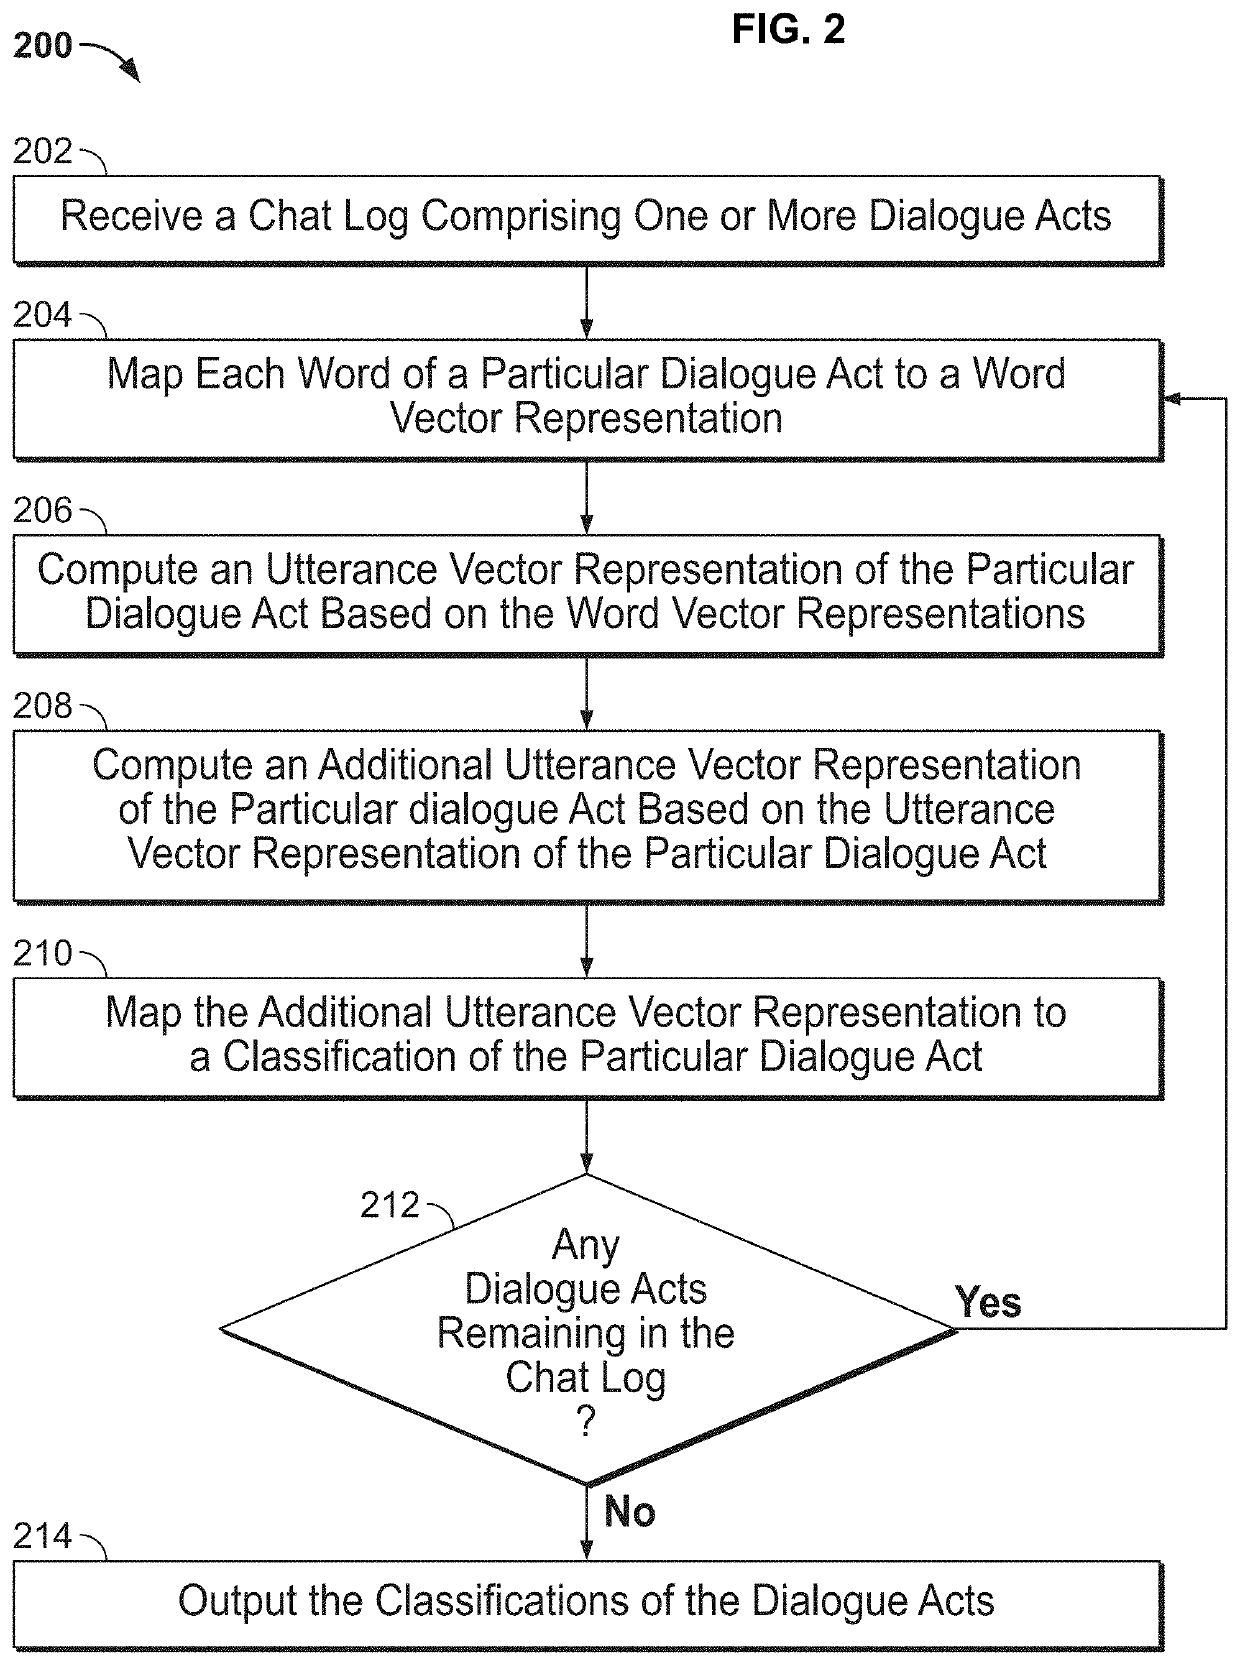 Dialogue act classification in group chats with dag-lstms